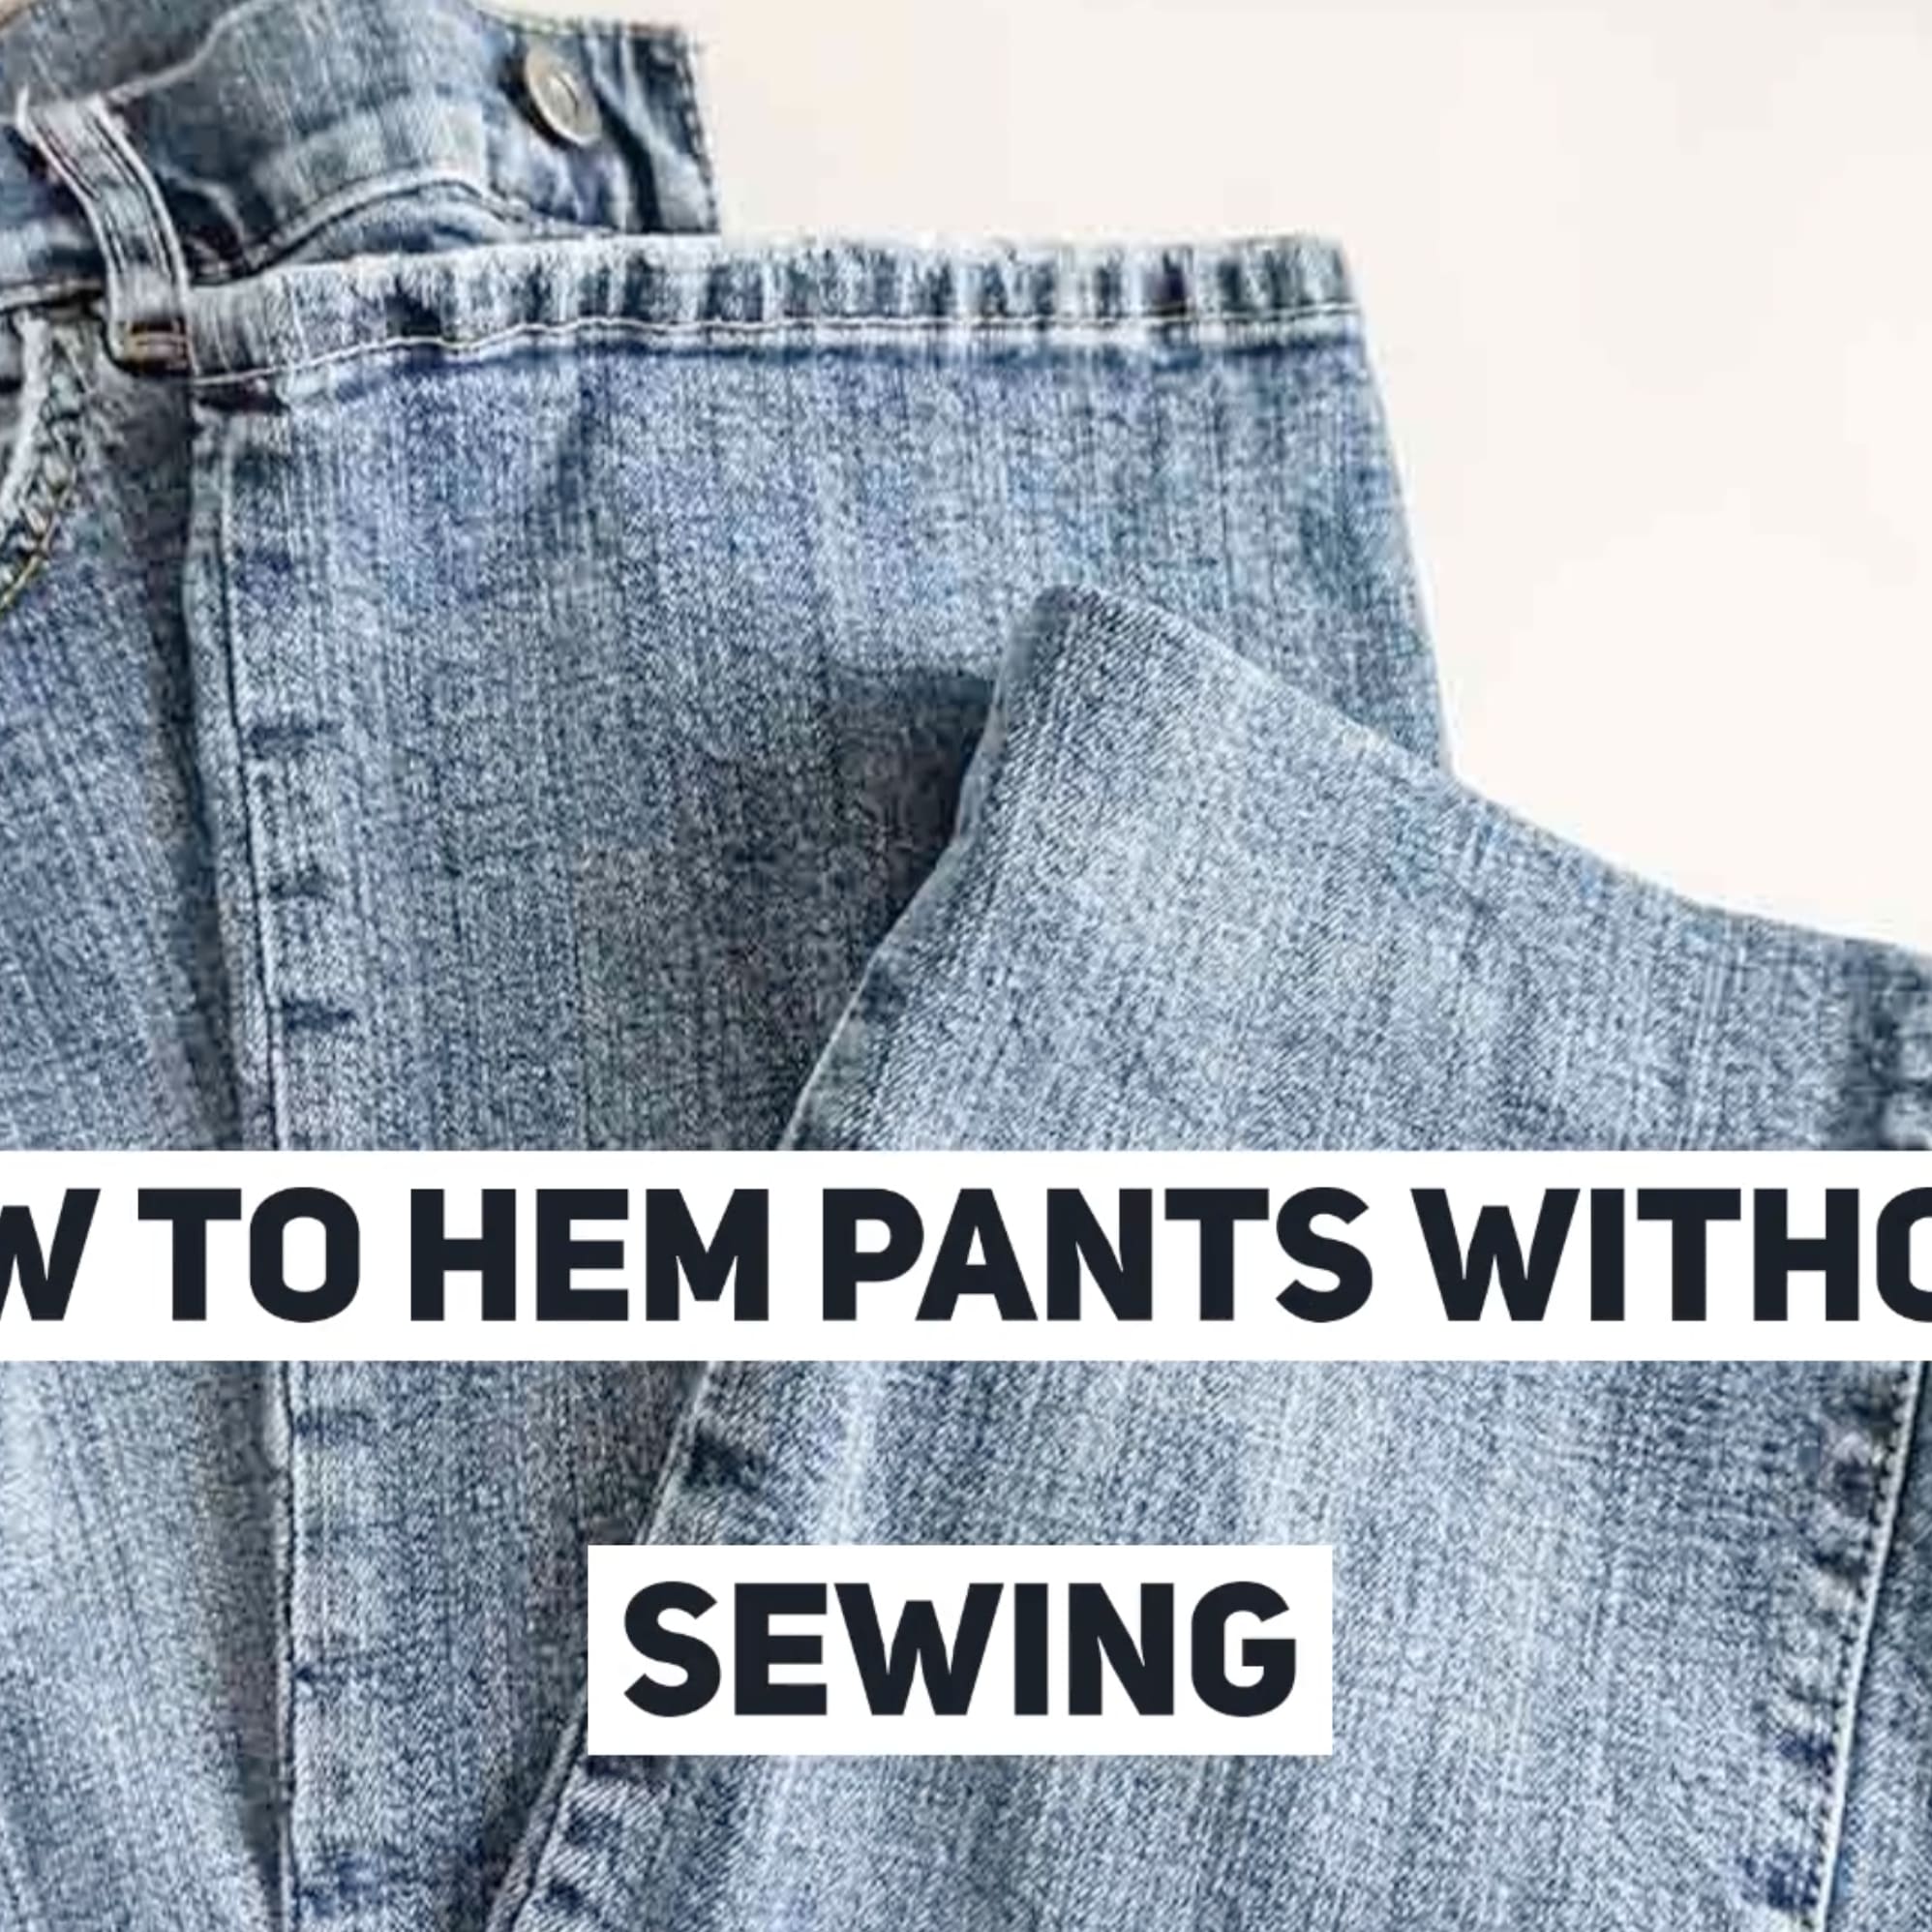 How To Hem Pants Without Sewing